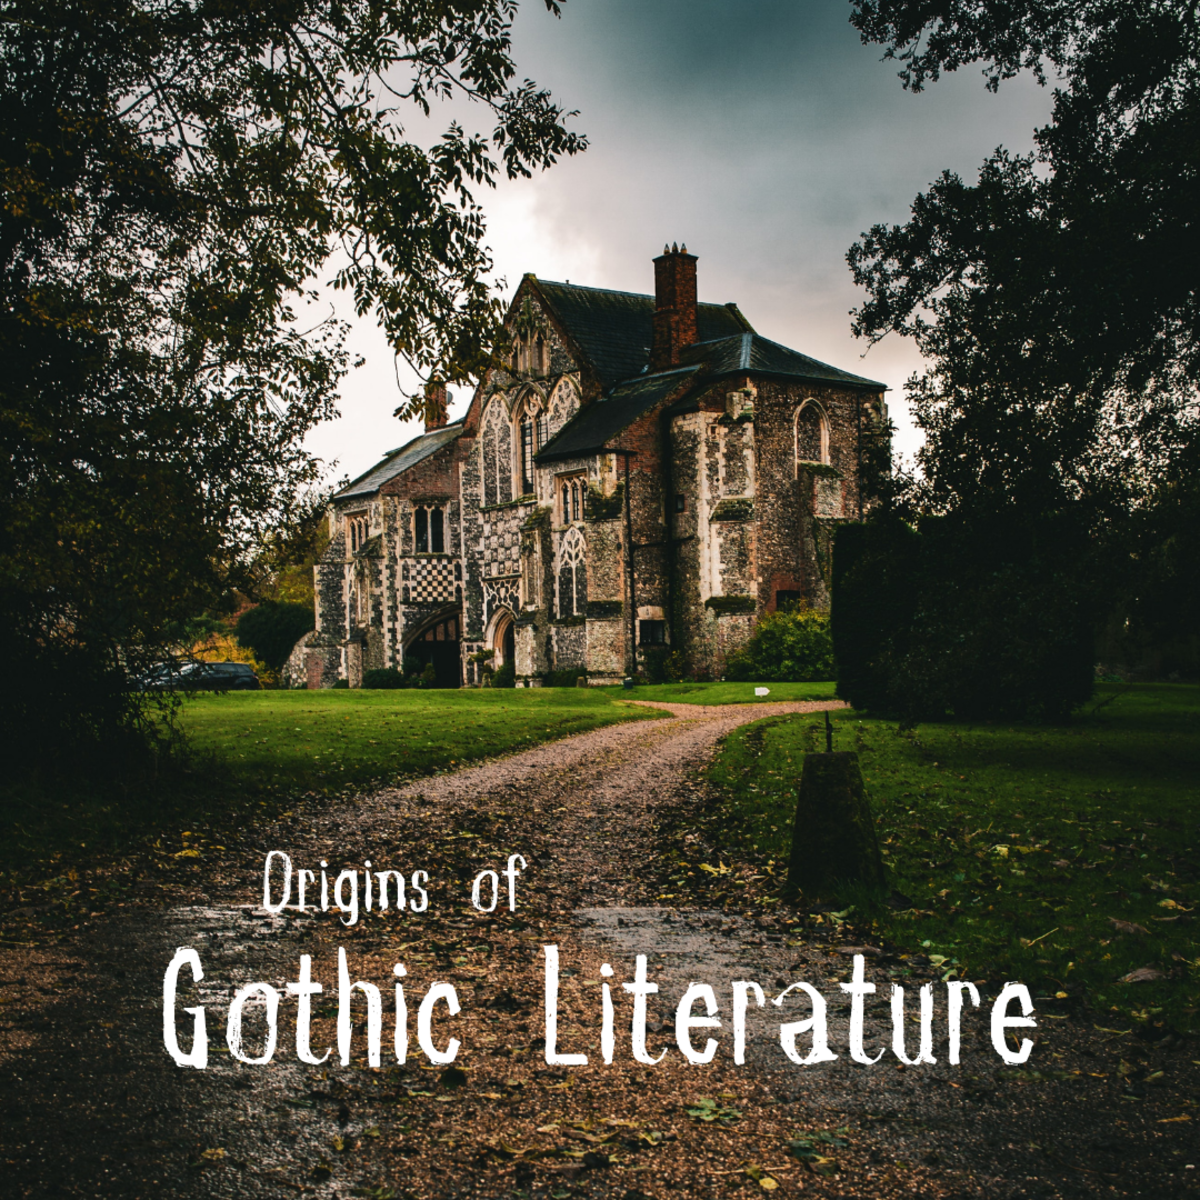 Gothic literature was introduced in the 18th century